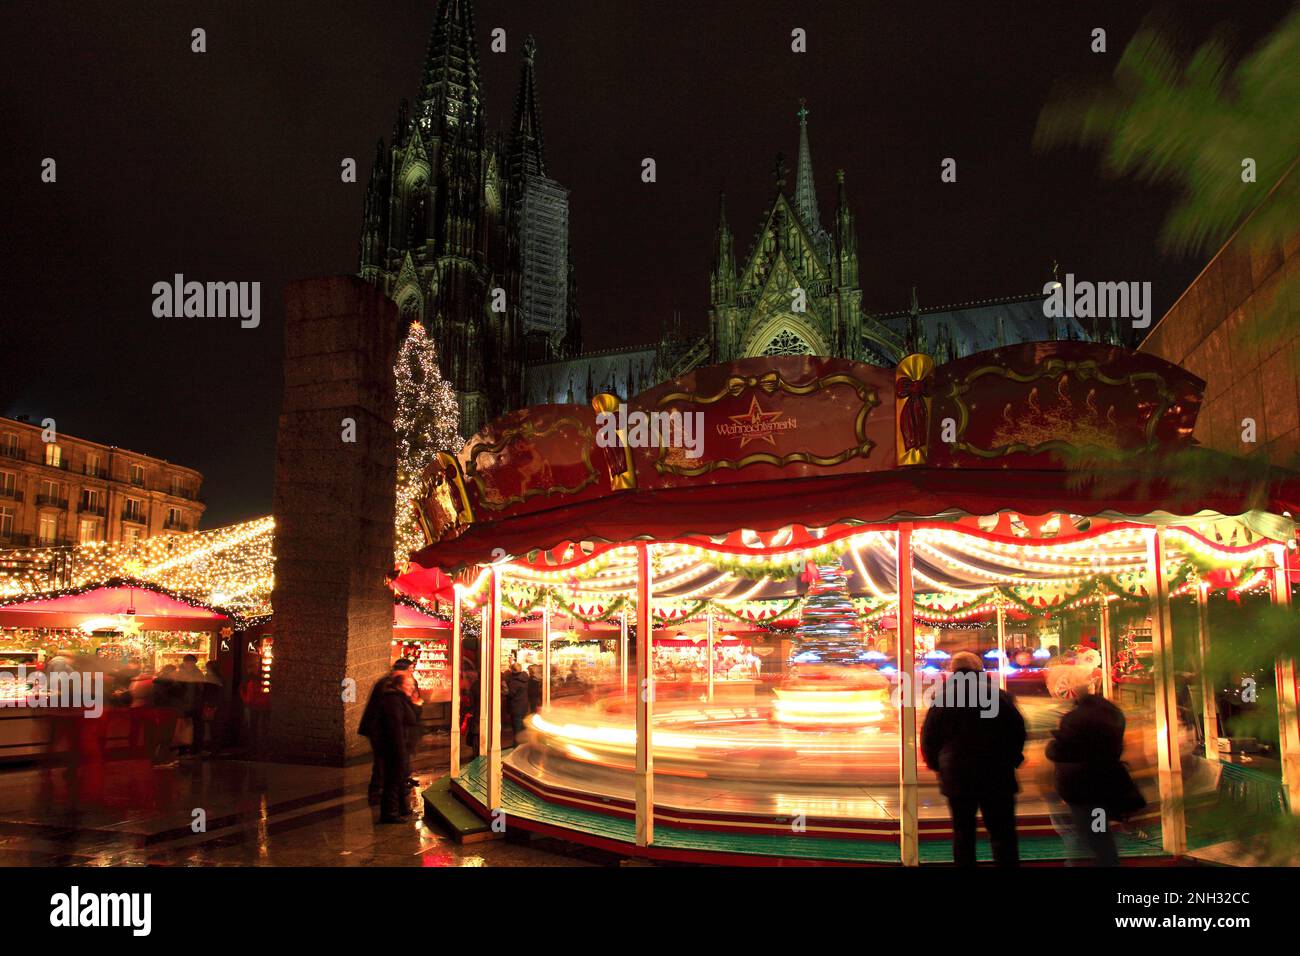 View of goods and stalls at the Christmas markets in Cologne City, North Rhine-Westphalia, Germany, Europe Stock Photo